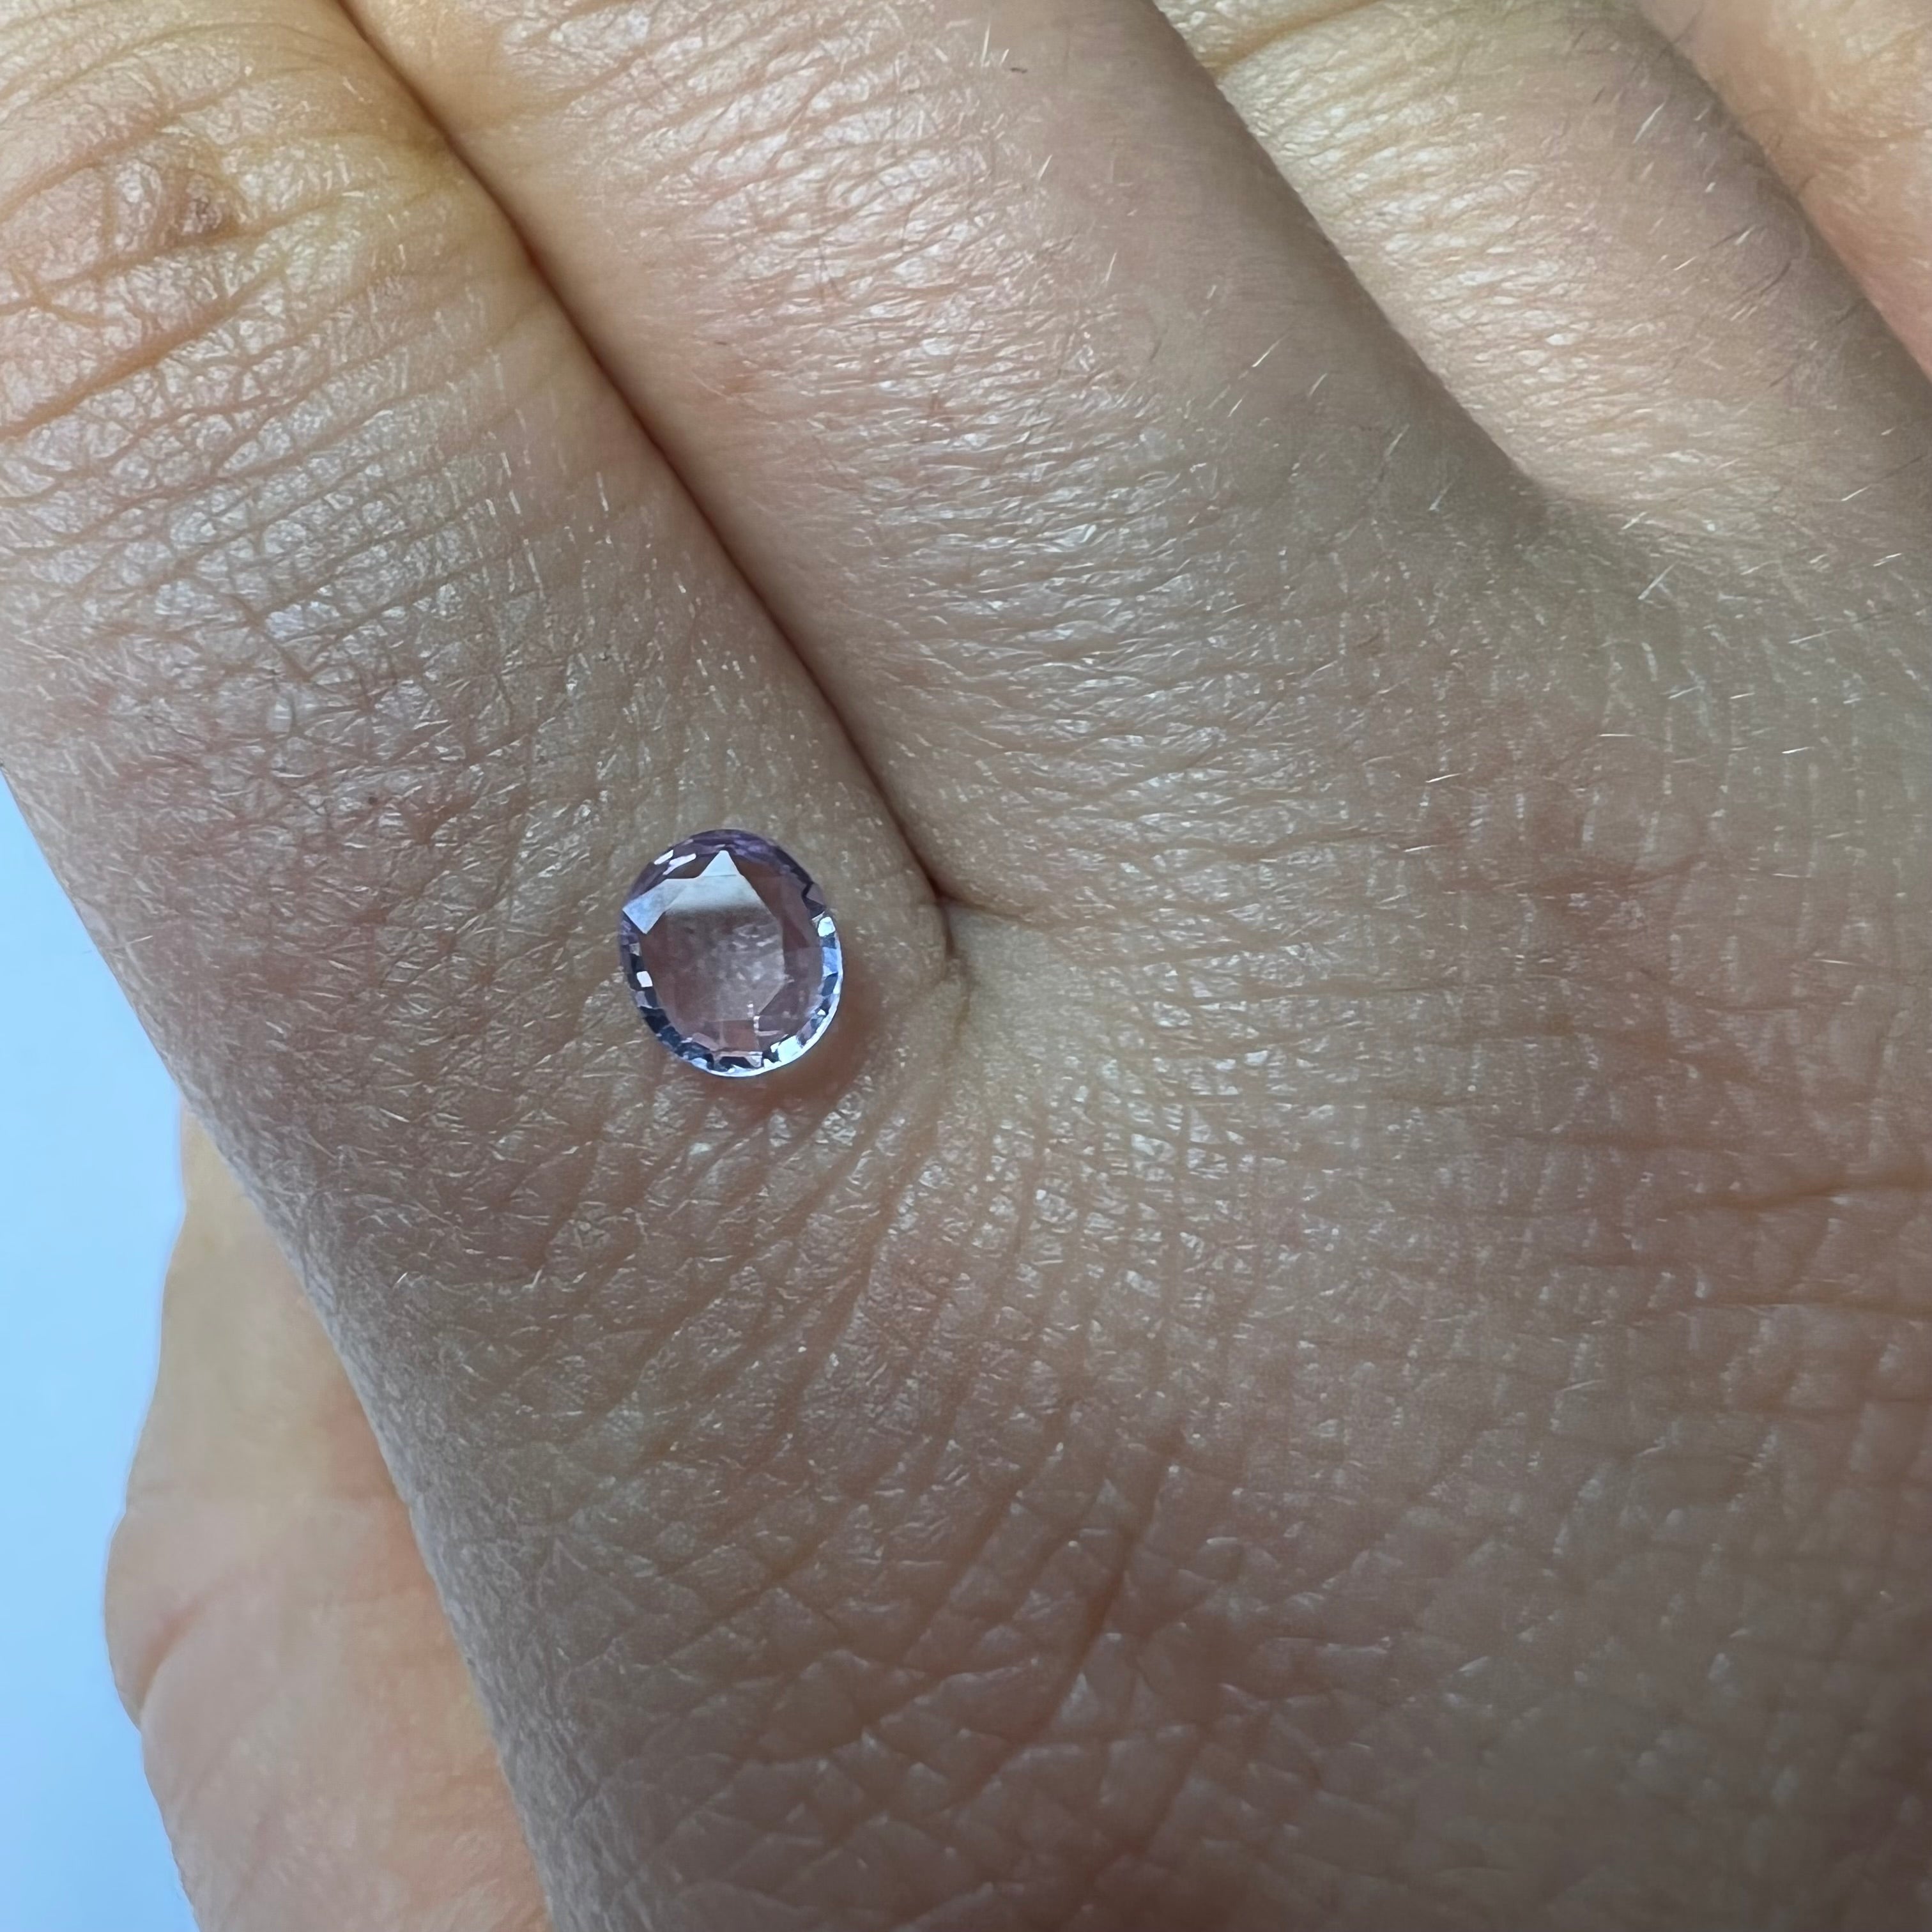 .56CT Loose Cotton Candy Pink Sapphire 5.84x4.96x1.98mm Earth mined Gemstone